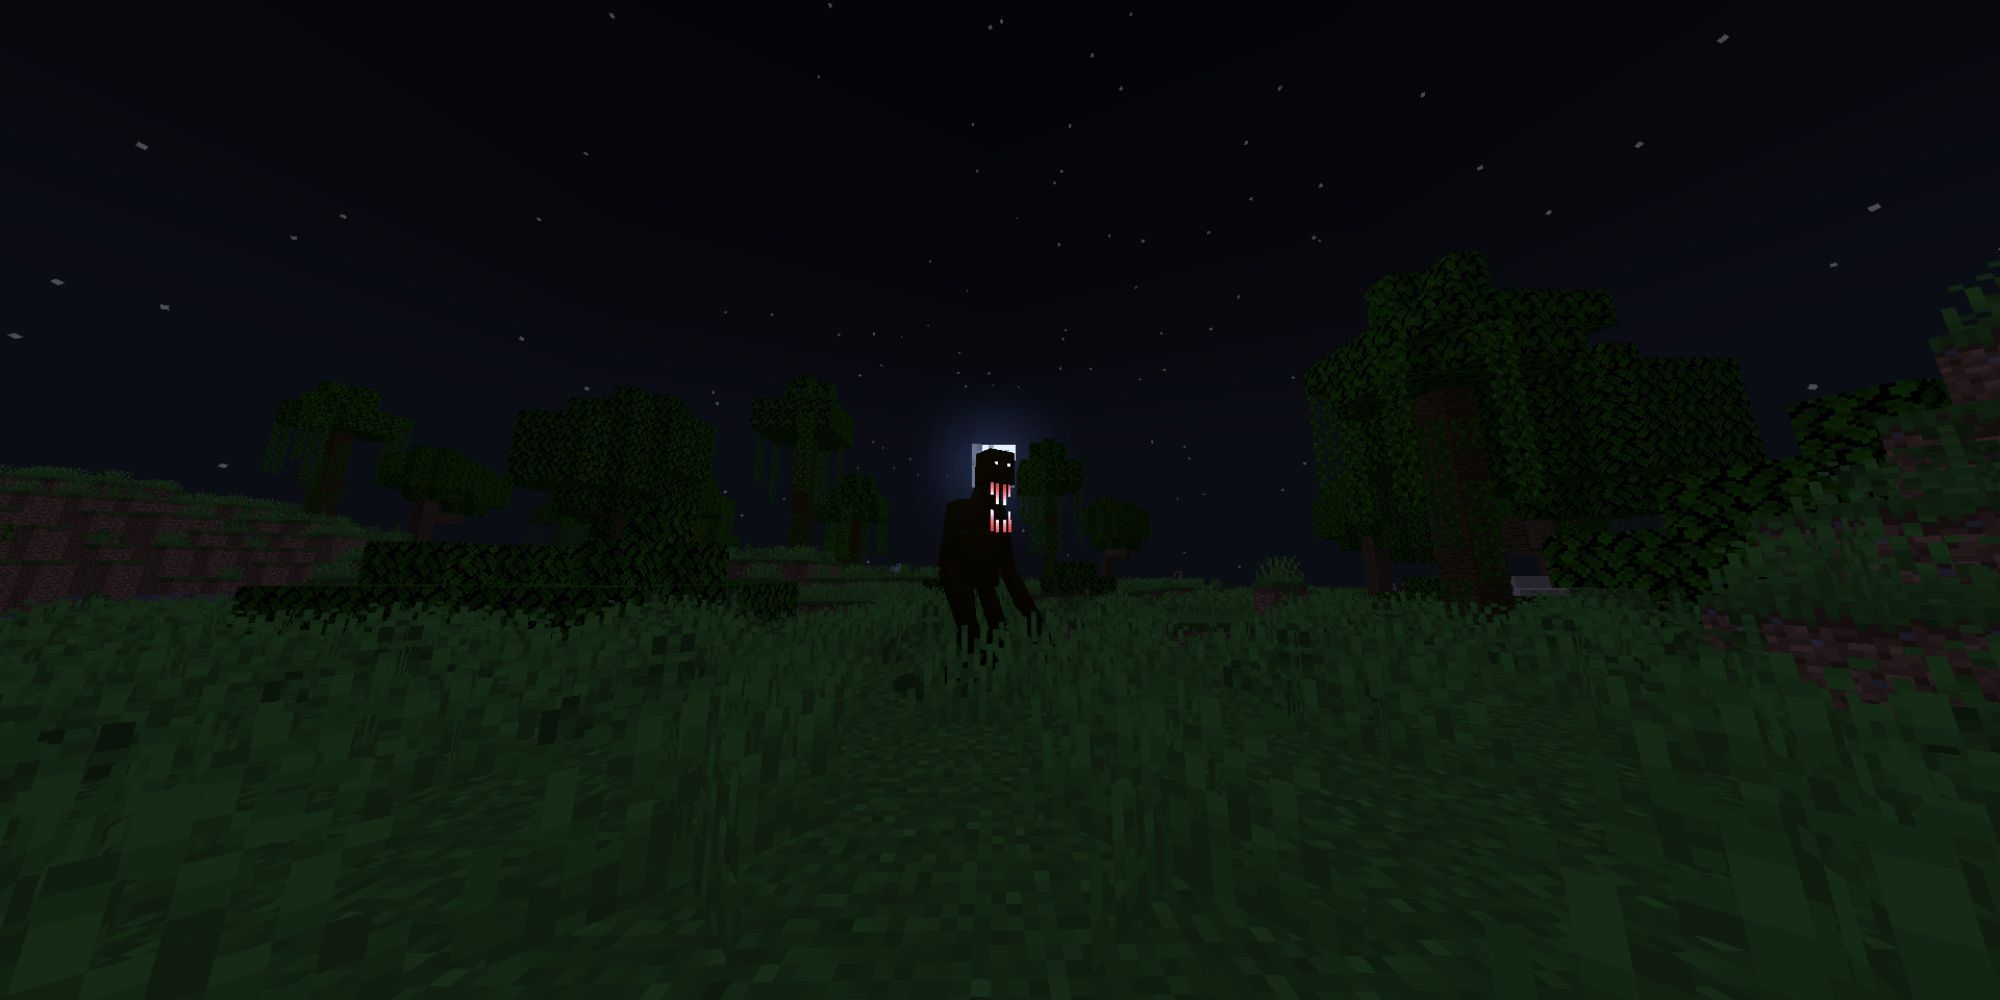 A grassy environment at night, with a tall, black, humanoid figure with a large mouth.